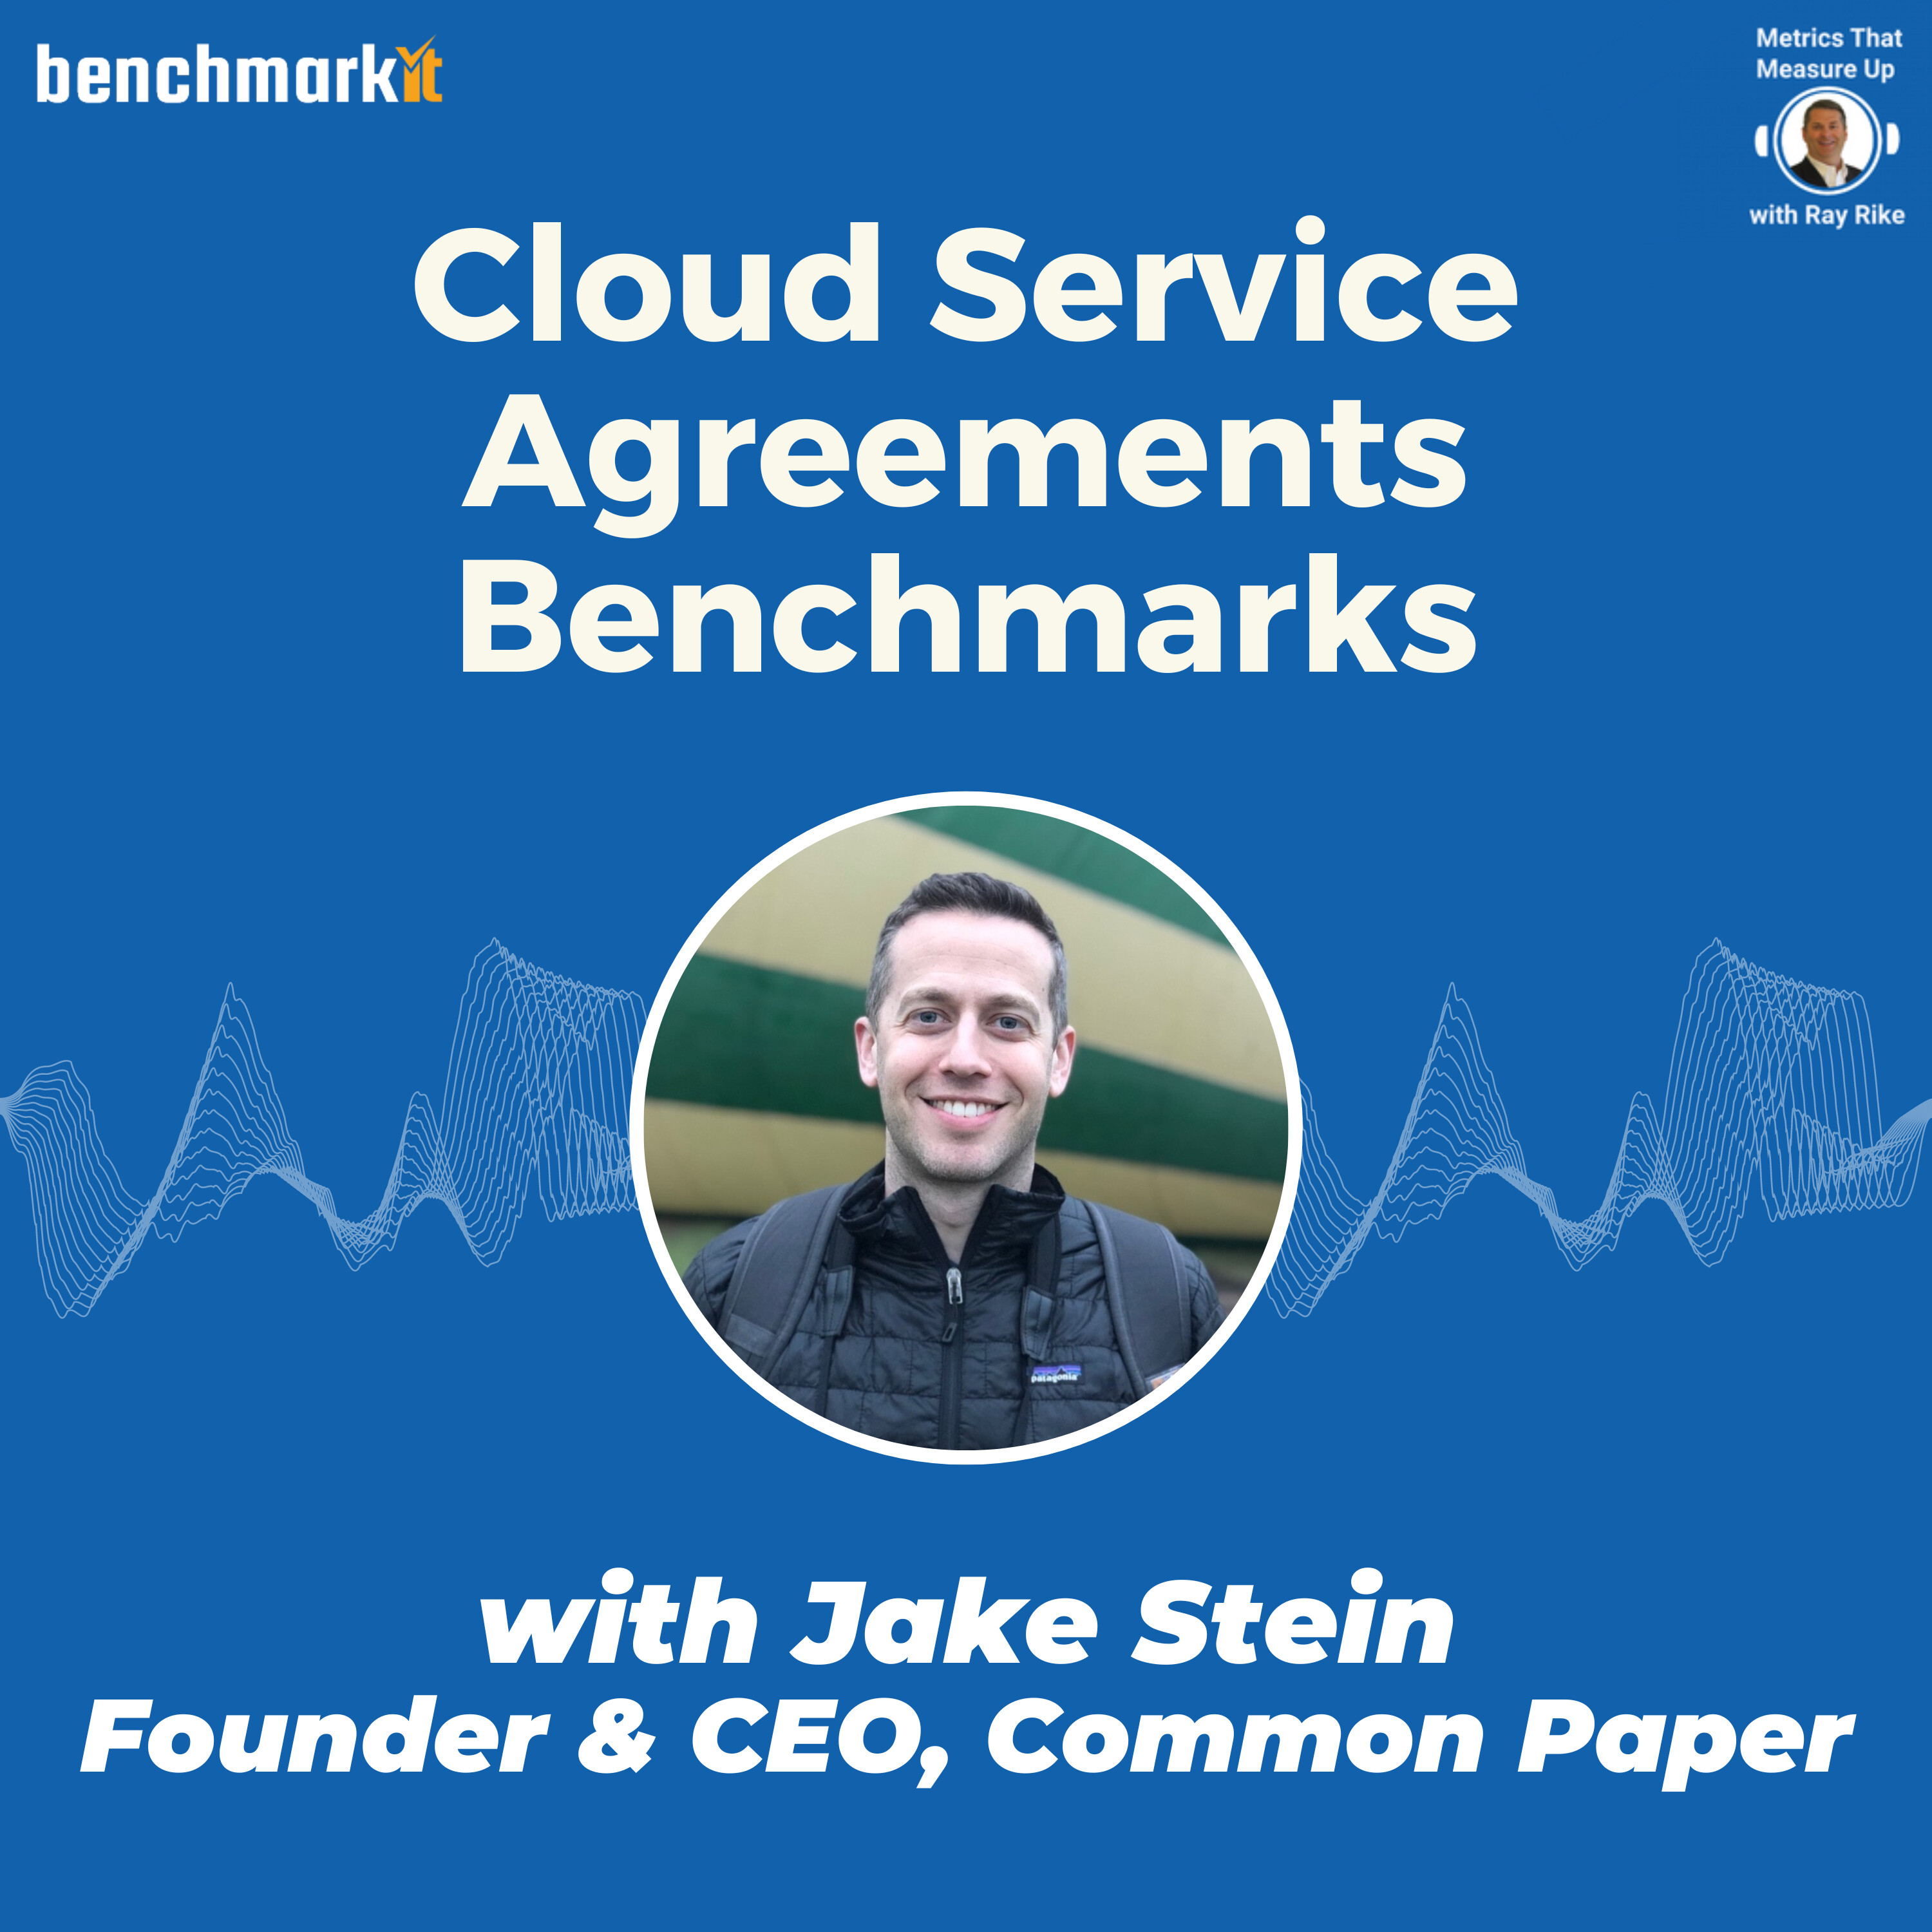 Cloud Service Agreement Benchmarks - with Jake Stein, Founder and CEO Common Paper